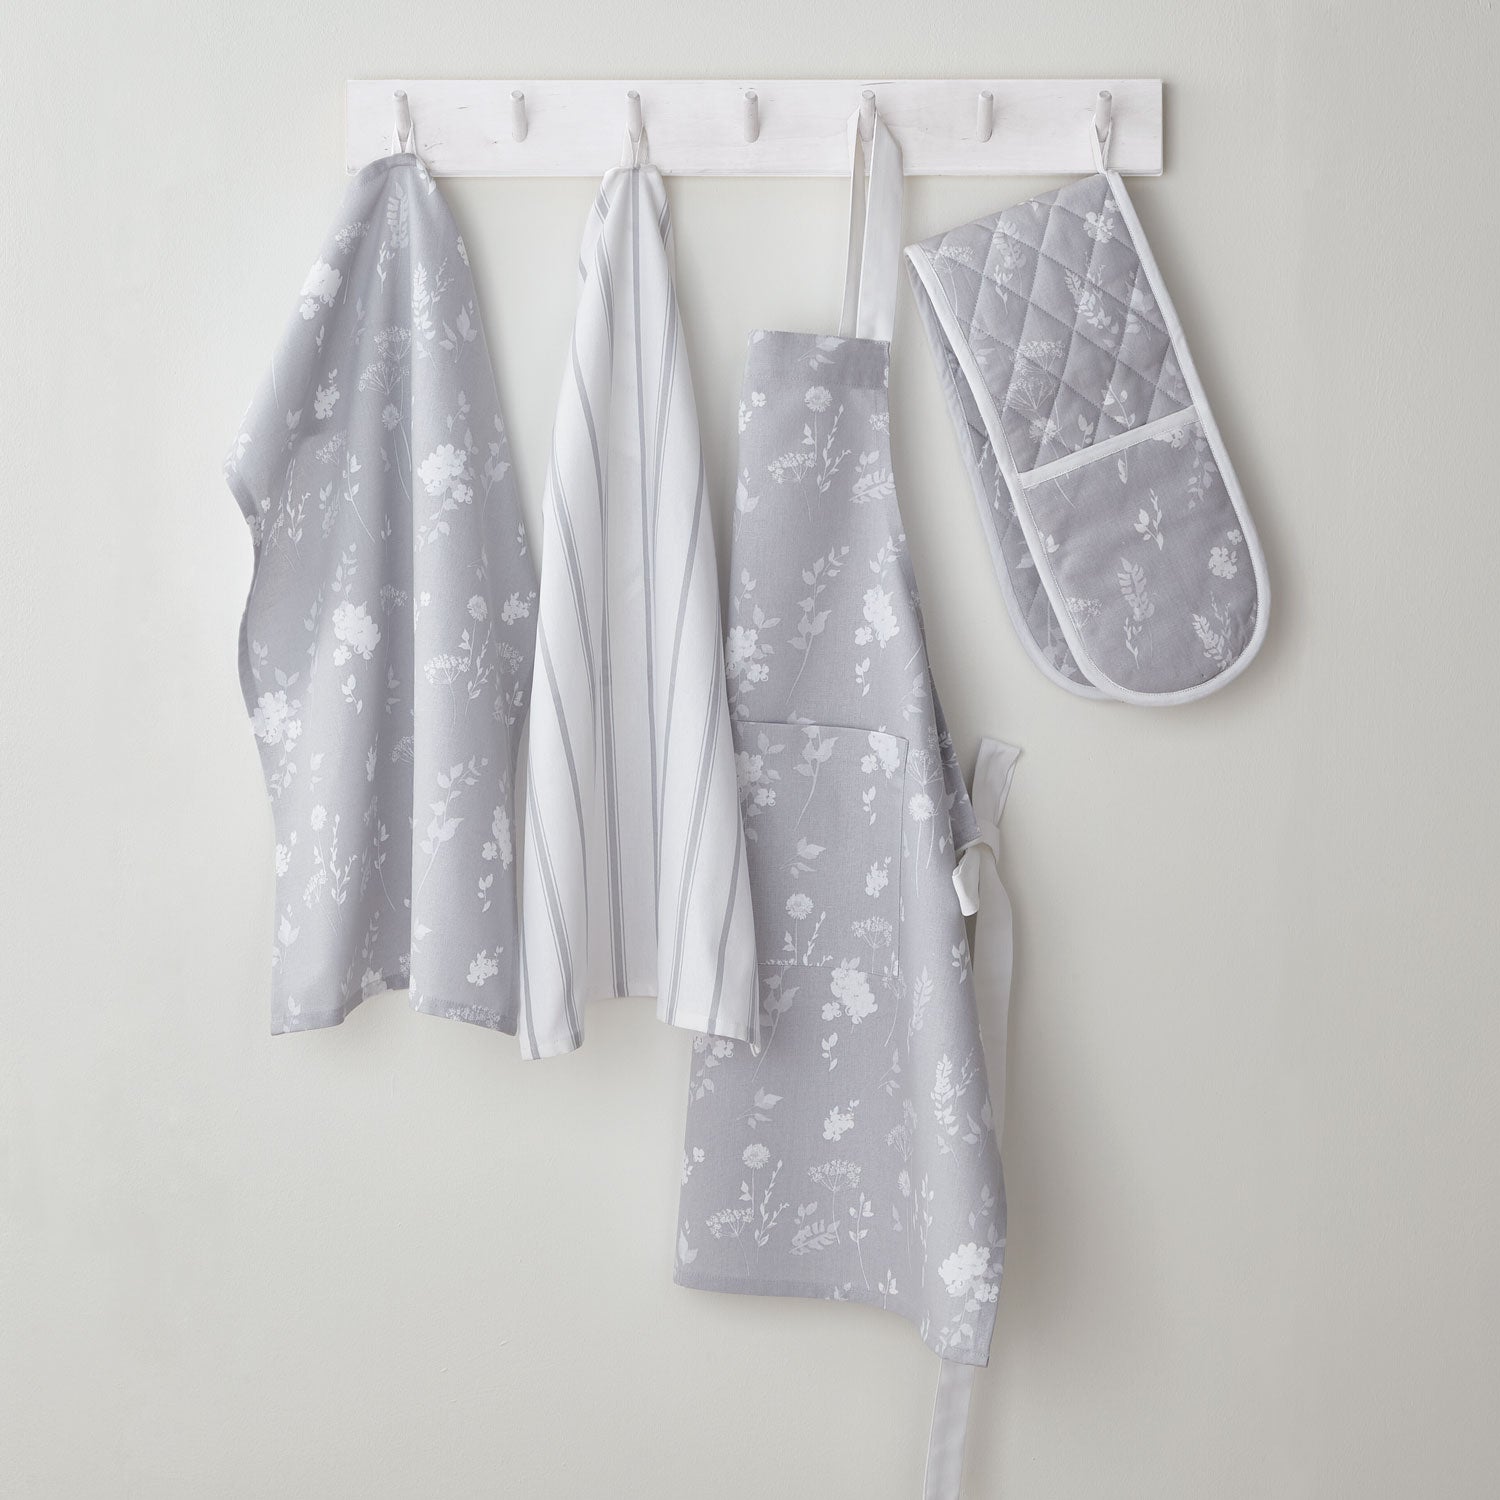 Catherine Lansfield Dining Meadowsweet Floral Tea Towels Pair - White / Grey 2 Shaws Department Stores